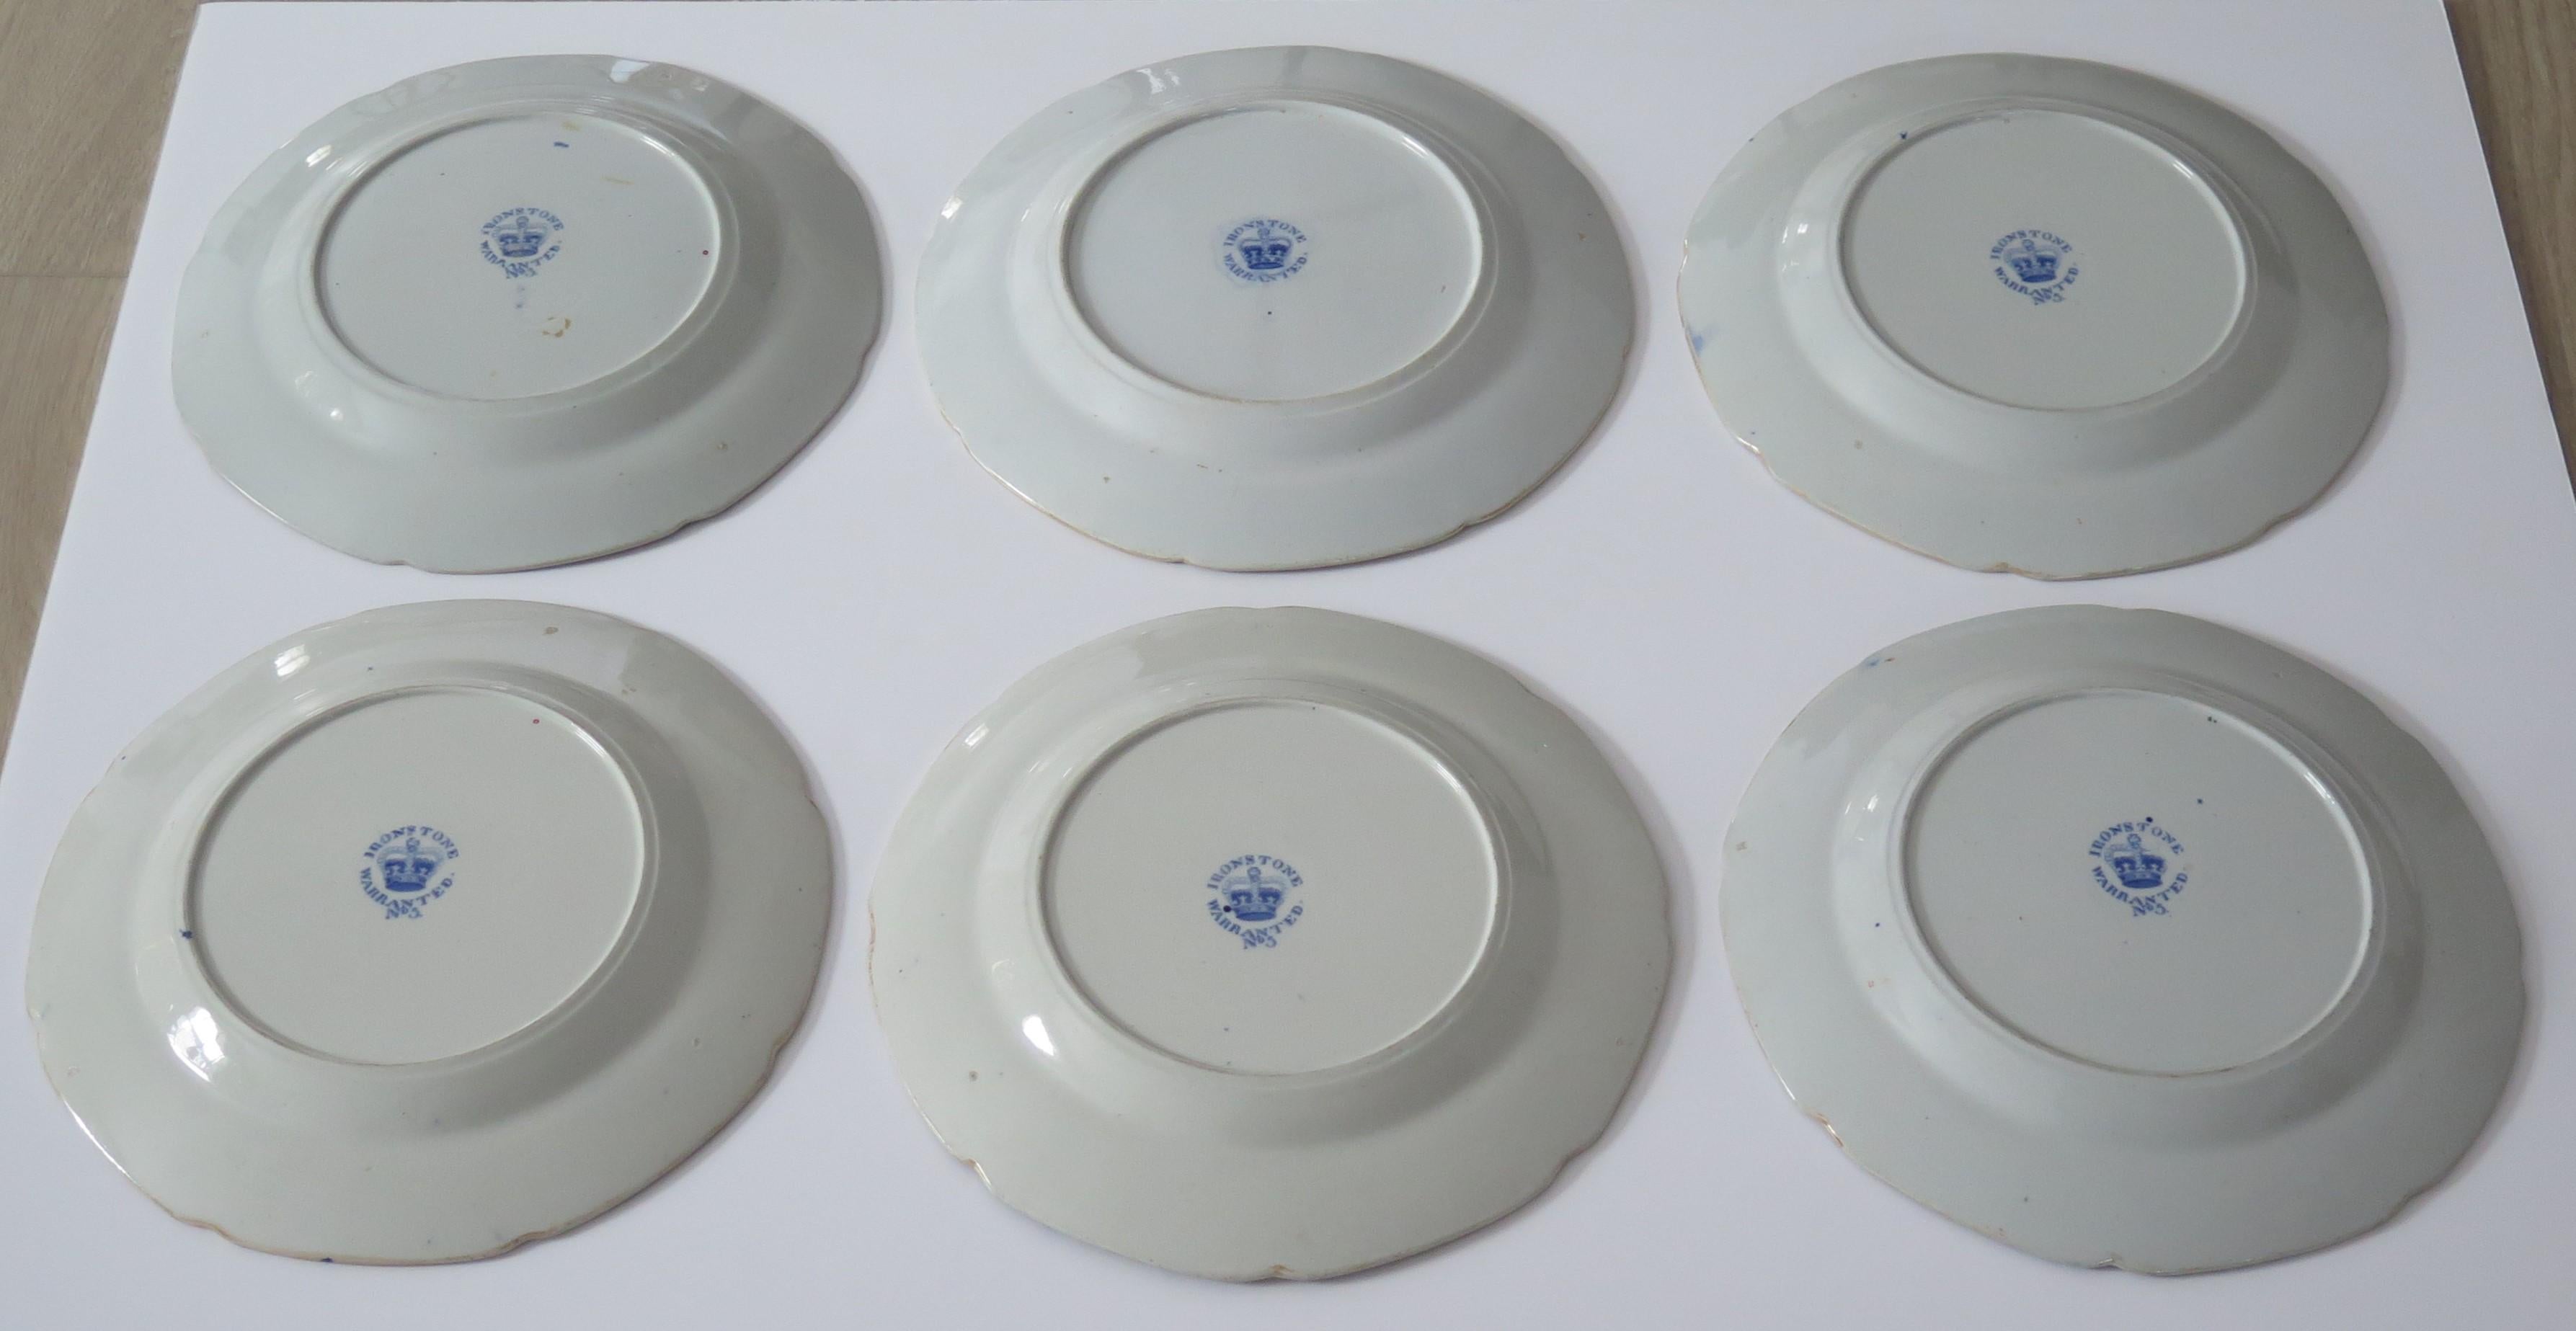 SIX Georgian Hicks & Meigh Ironstone Dinner Plates Water Lily Ptn No.5, Ca 1815 For Sale 3